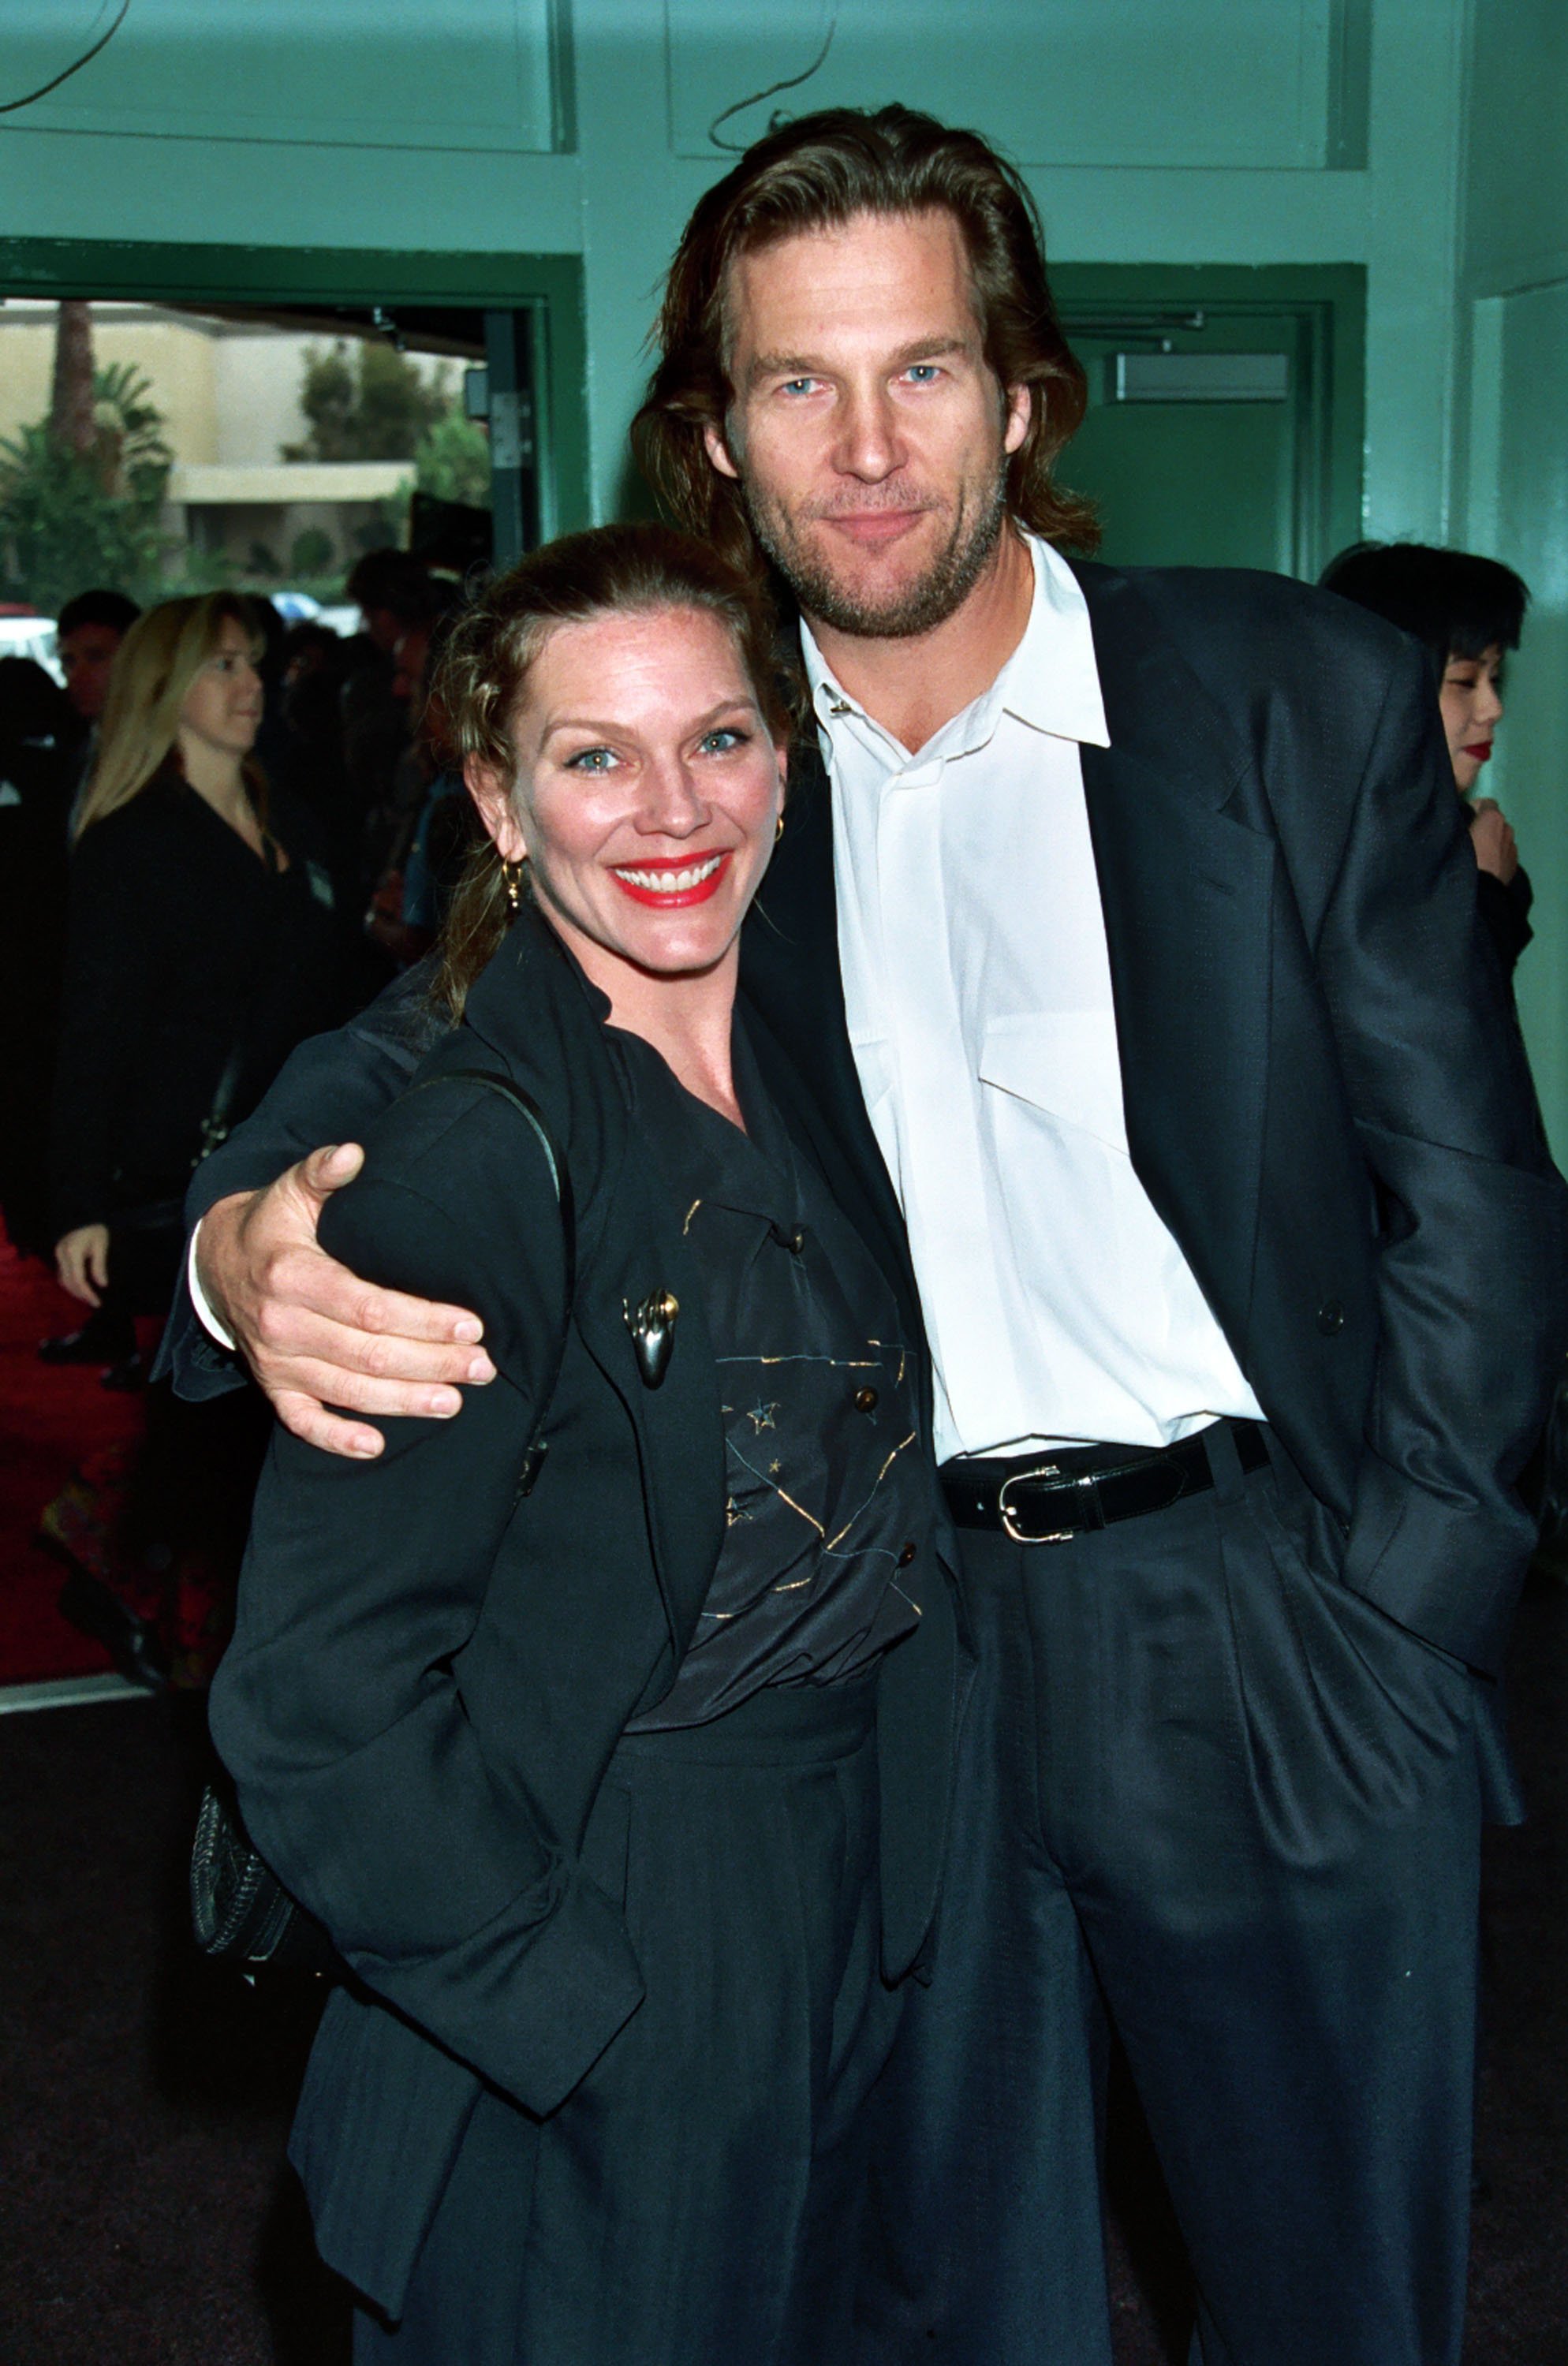 Susan Geston and Jeff Bridges in Hollywood 2006. | Source: Getty Images 